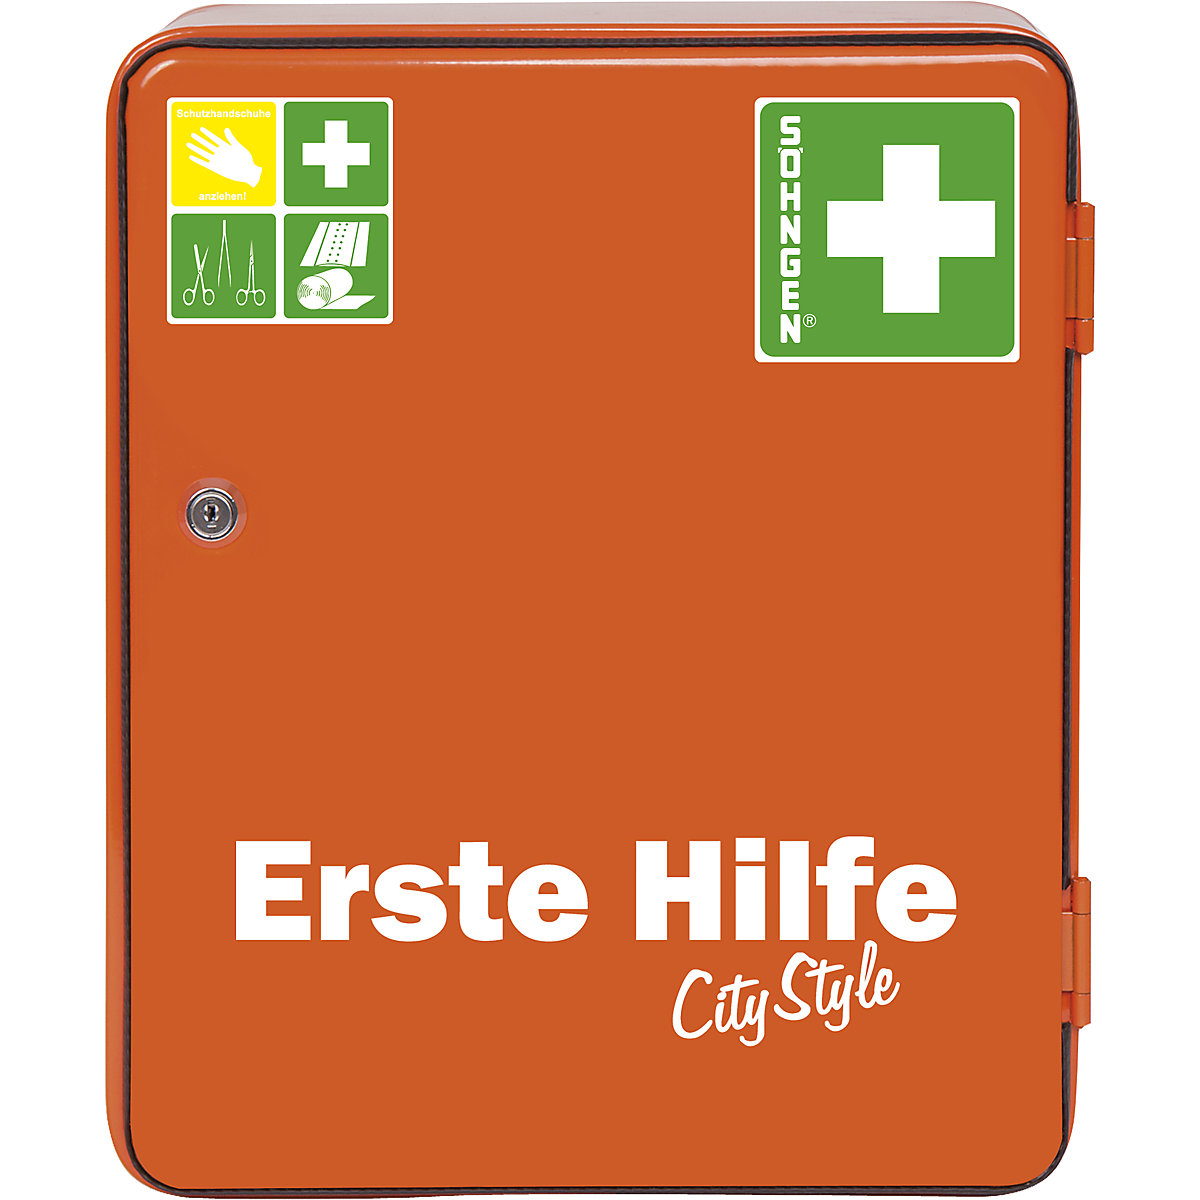 HEIDELBERG City Style first aid cabinet to DIN 13157 - SÖHNGEN